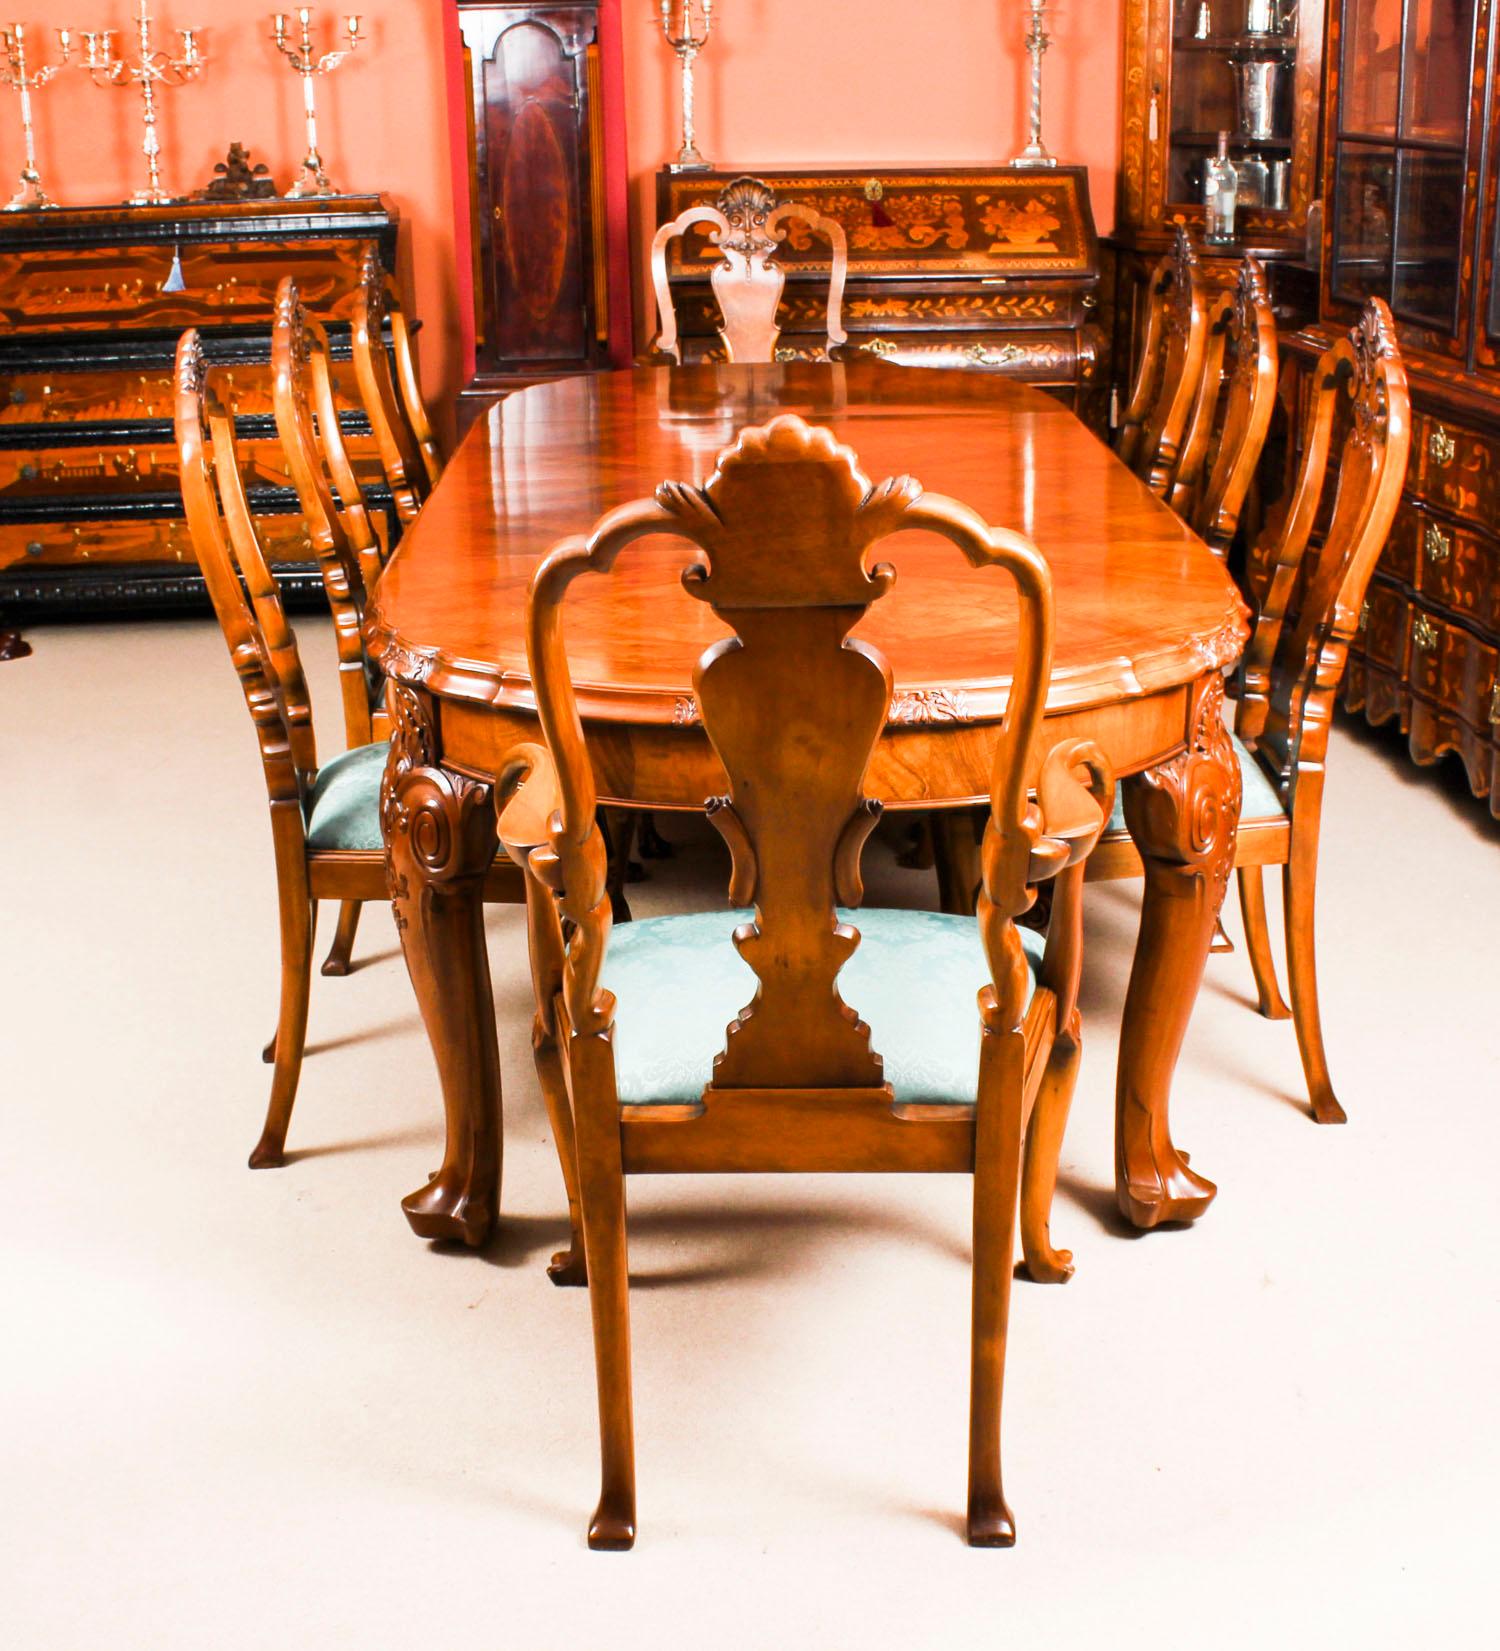 This is a fabulous antique Queen Anne Revival burr walnut dining set, comprising a burr walnut dining table and eight burr walnut dining chairs, circa 1900 in date.

The table is of oval shape, has it's original winding mechanism and has two leaves